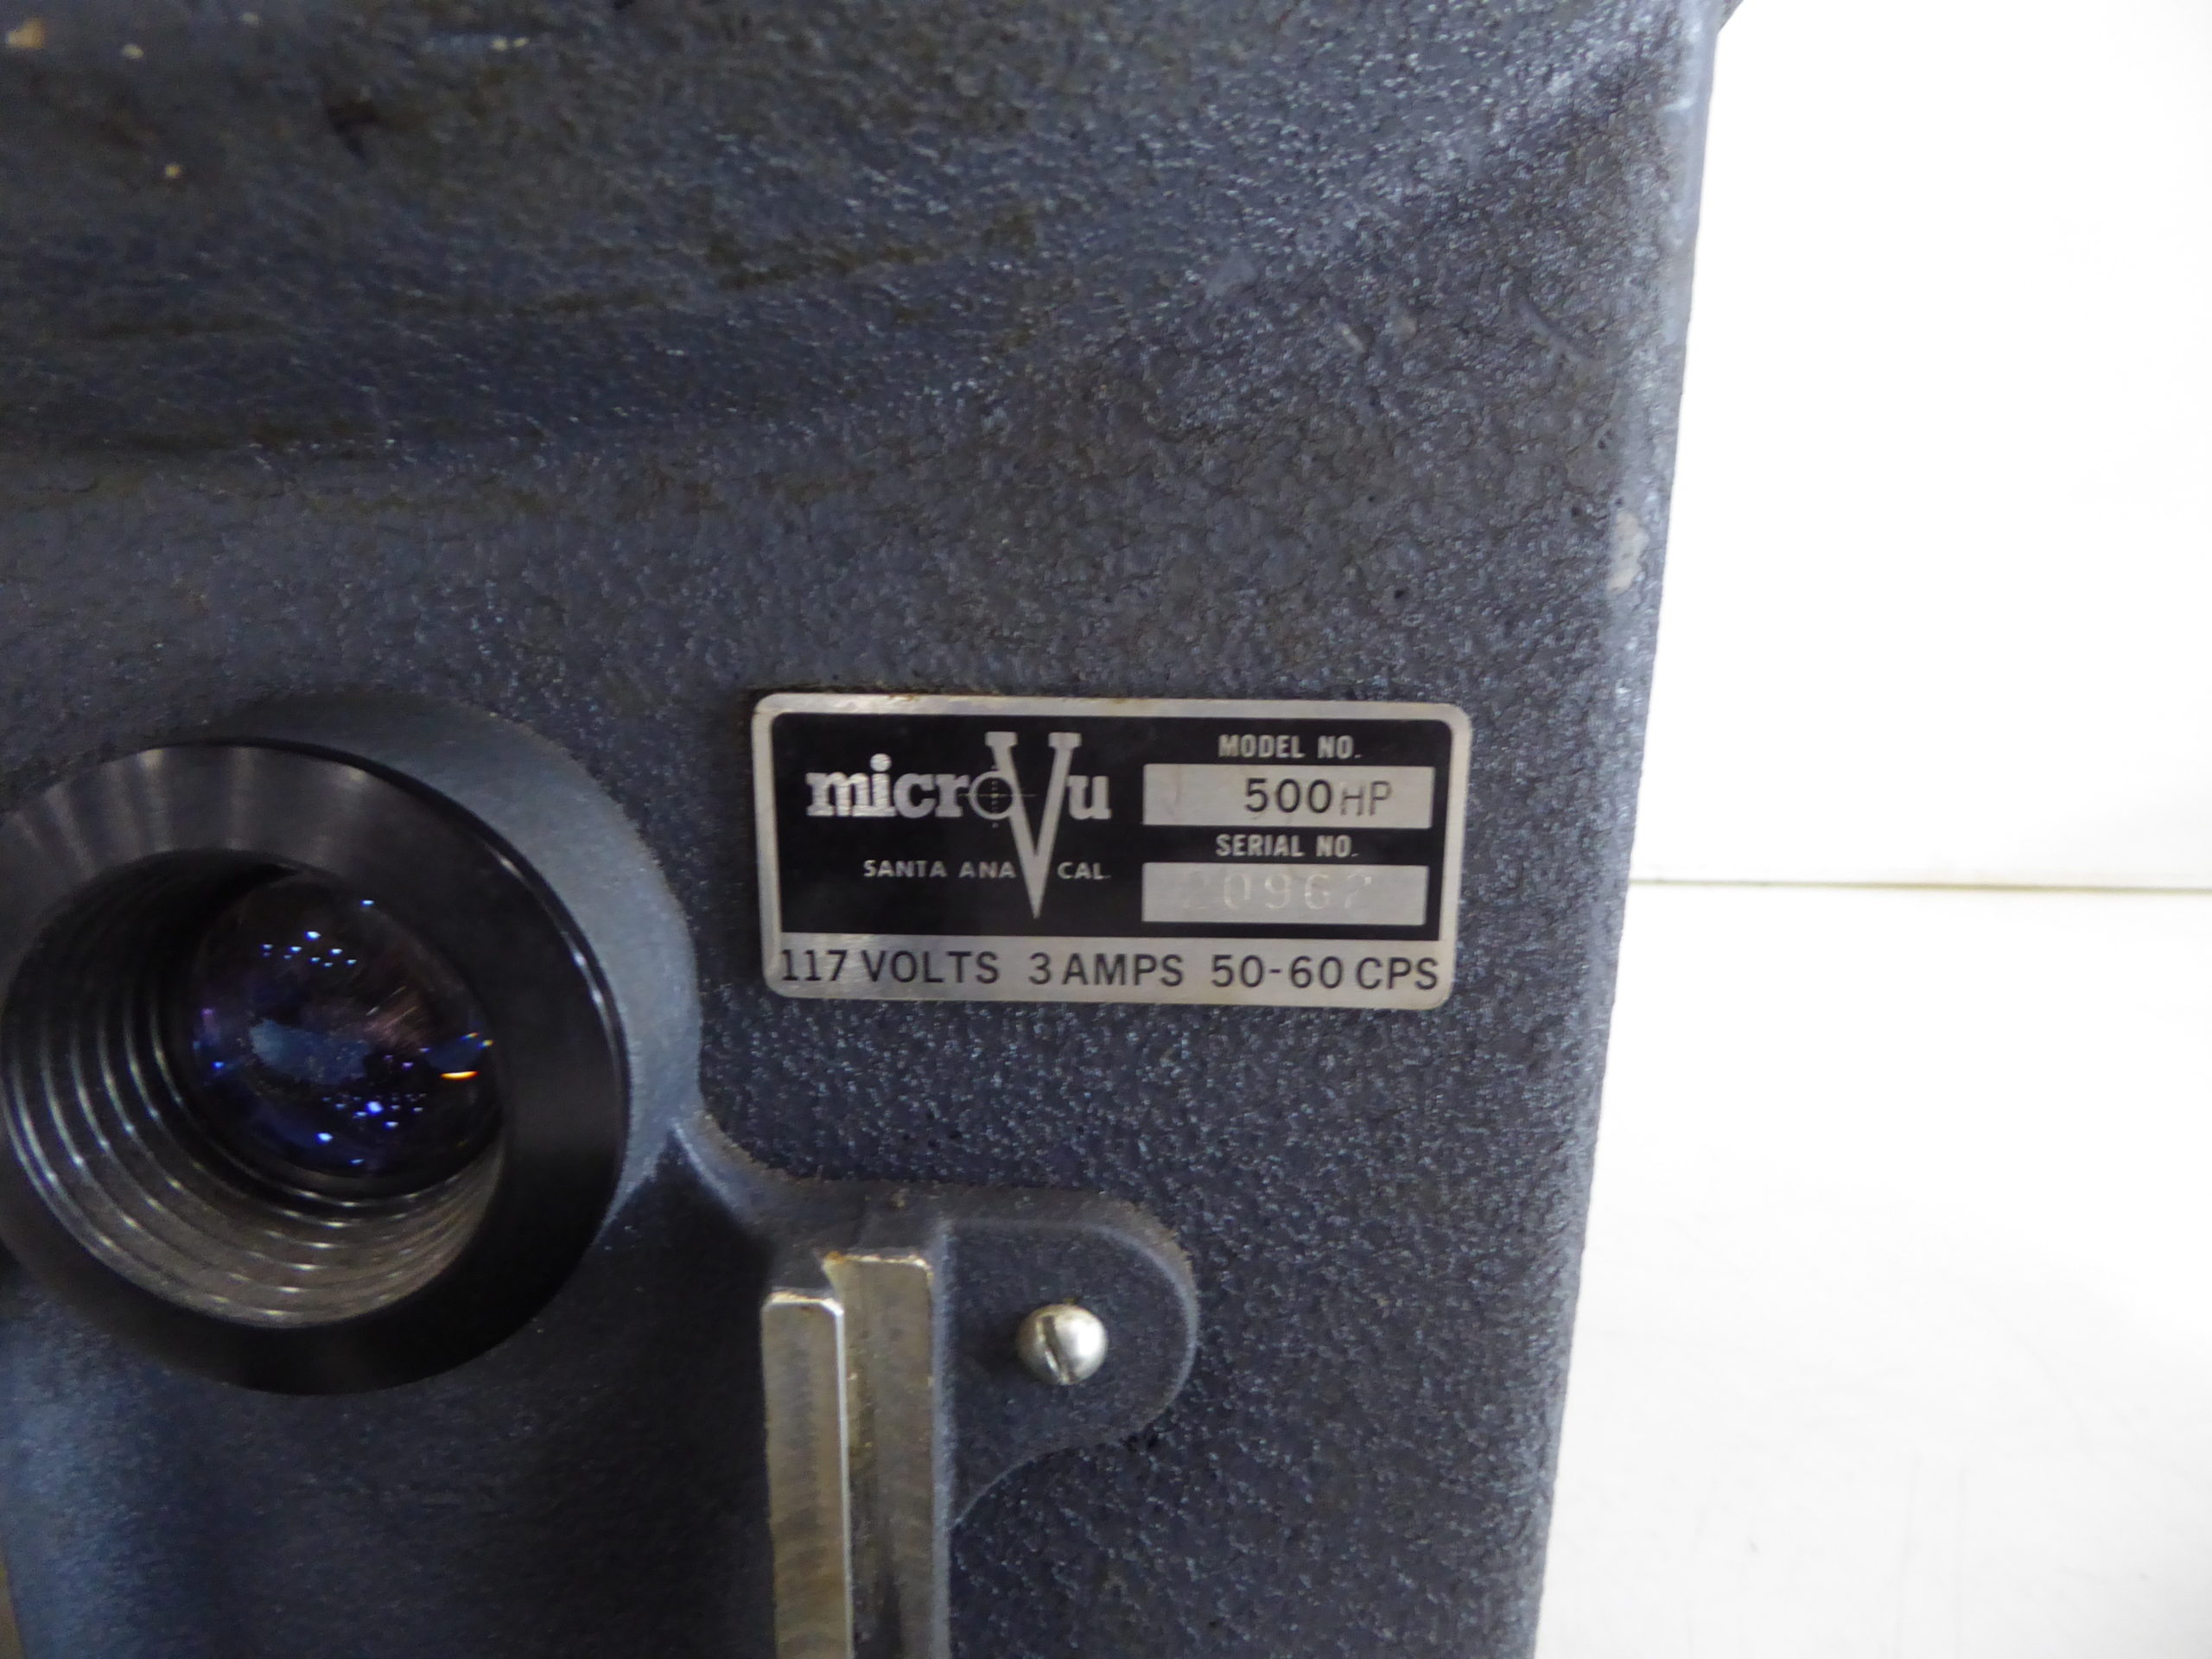 Used - Micro V4 Optical Comparator w/ 12" Dia. Screen M2486-Misc. Equipment